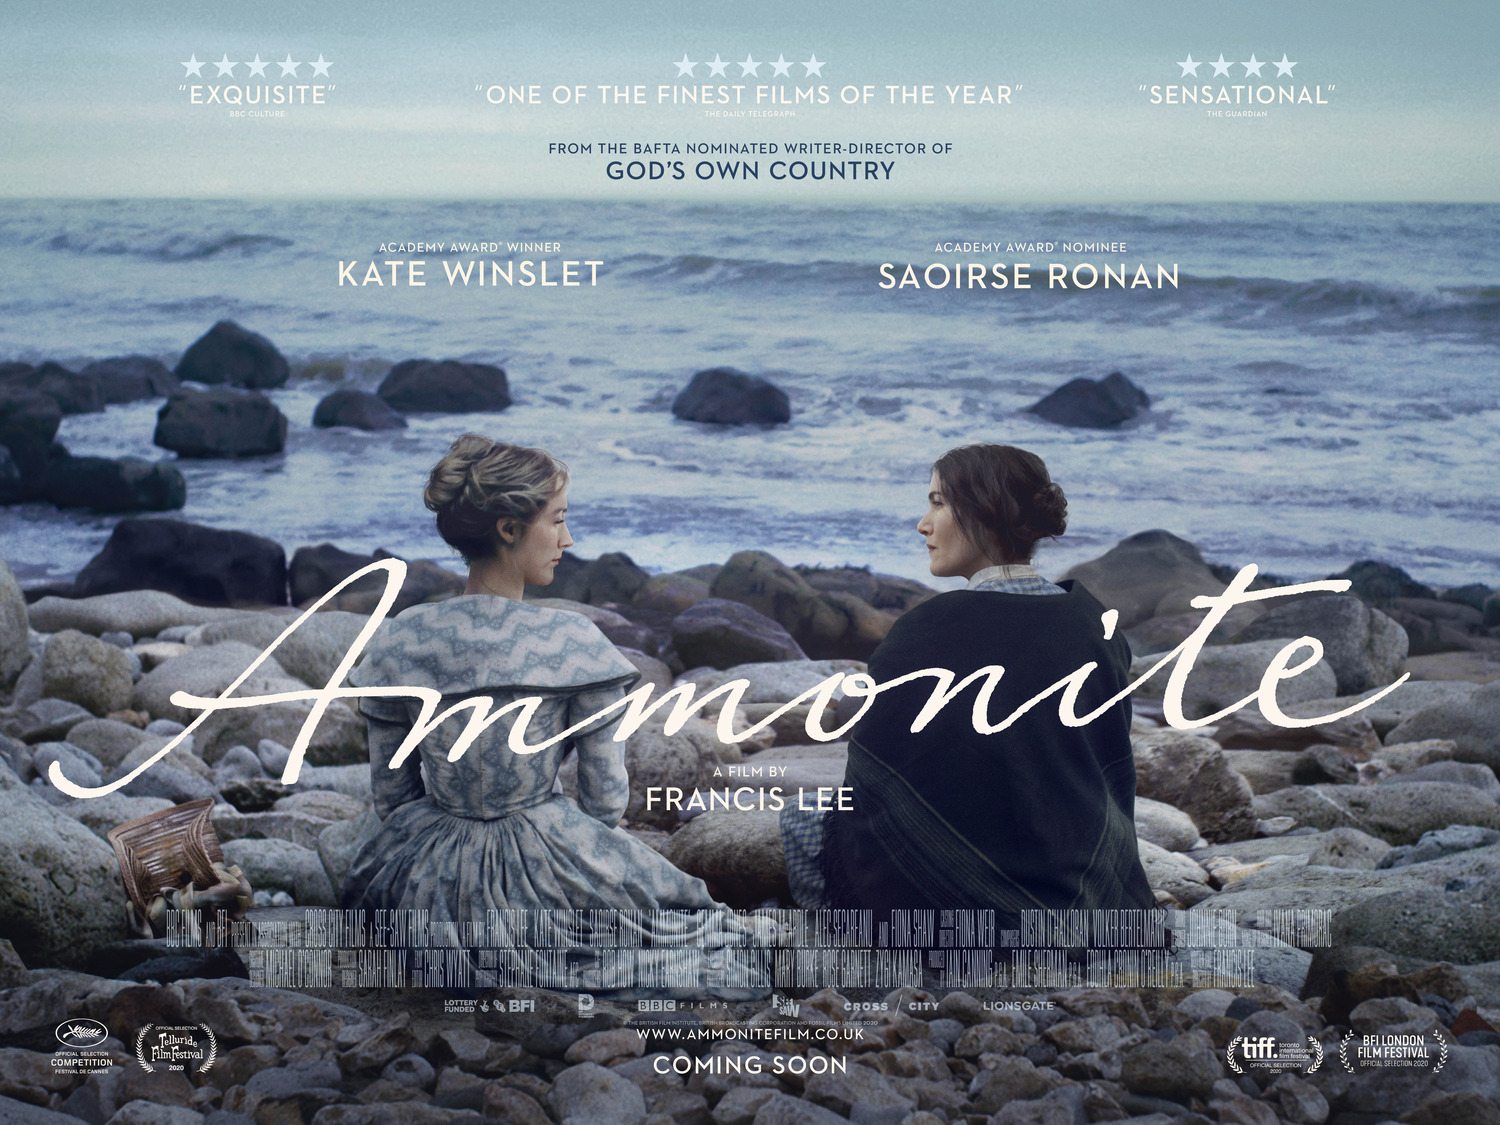 Extra Large Movie Poster Image for Ammonite (#2 of 2)